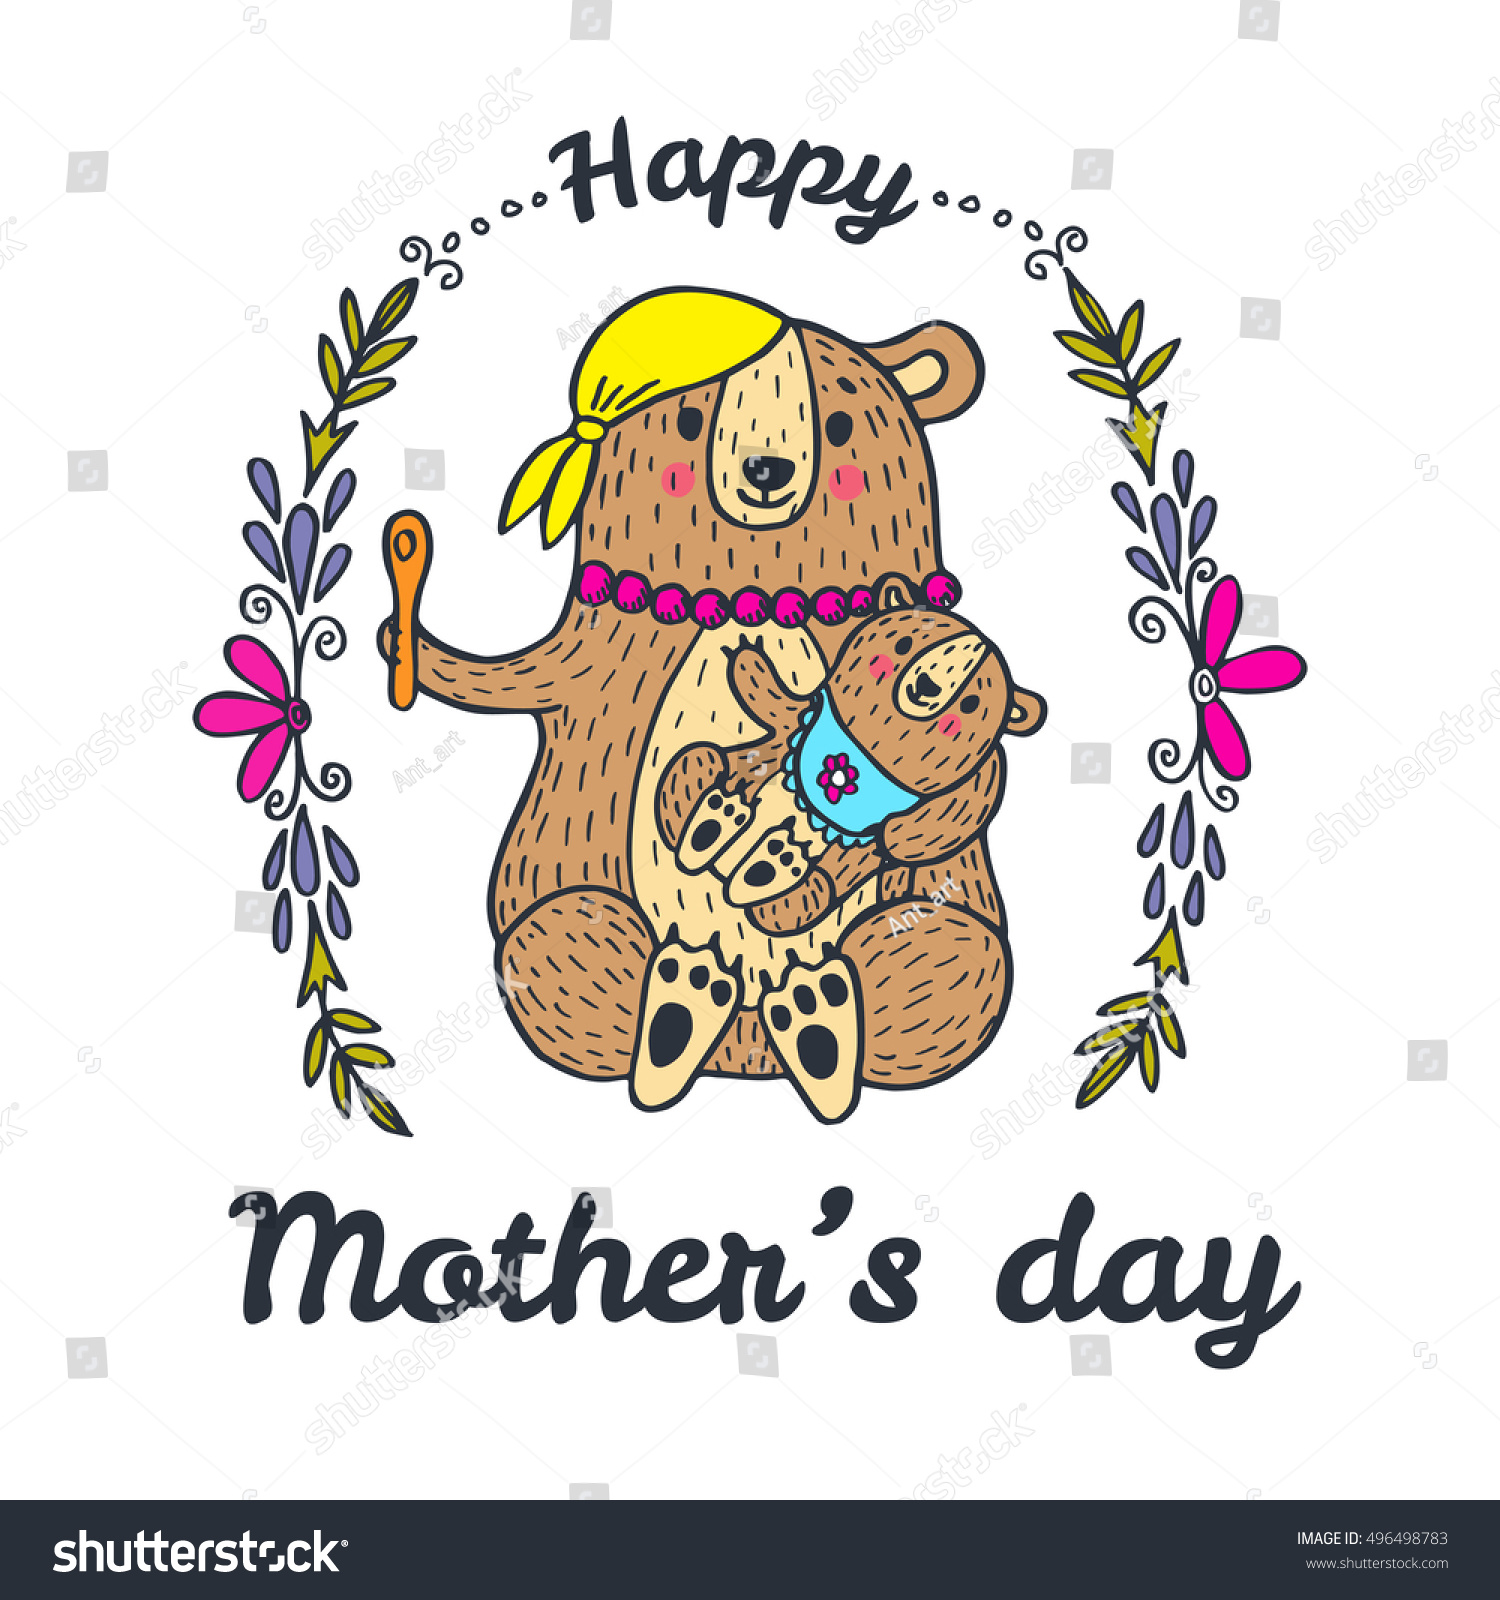 SVG of Happy Mother's Day card. Vector illustrated poster with bear characters. svg